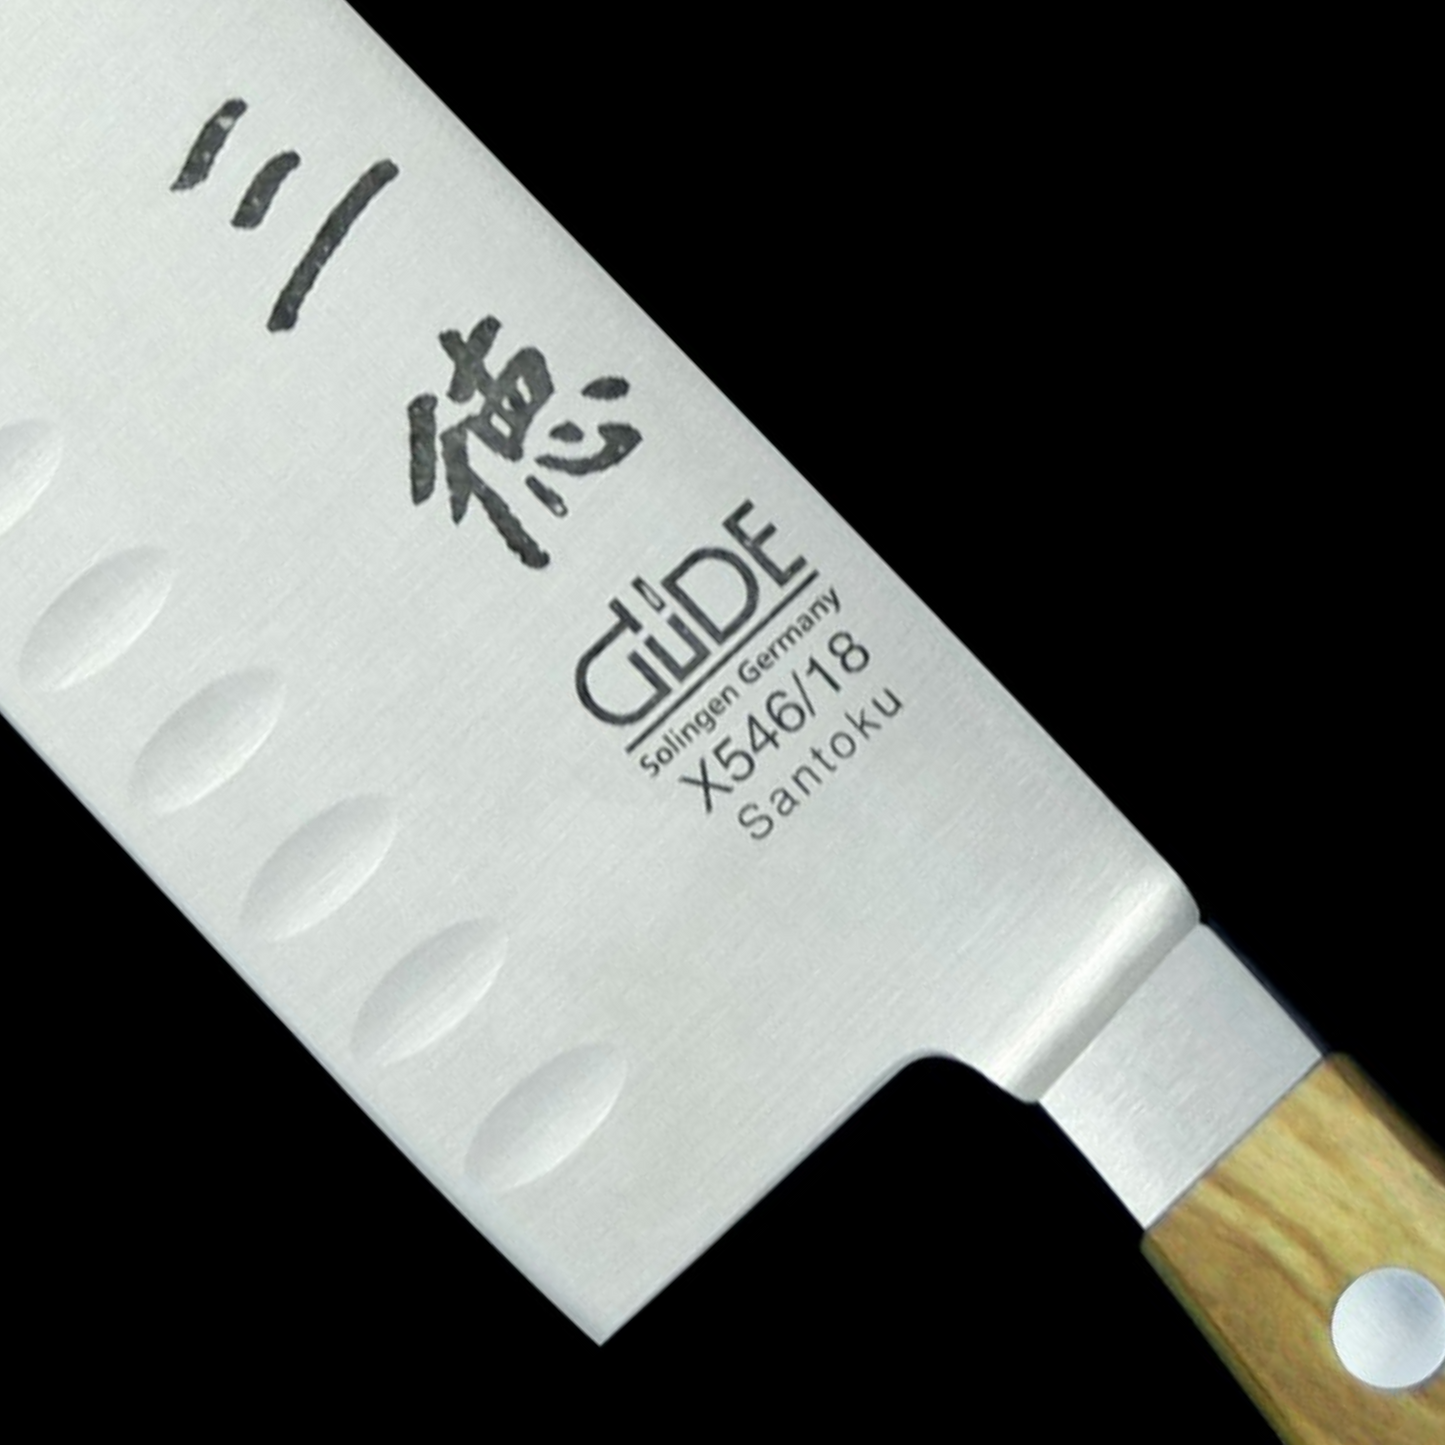 Gude Alpha Olive Series Forged Double Bolster Santoku Knife 7", Olivewood Handle and Granton Edge - GuedeUSA